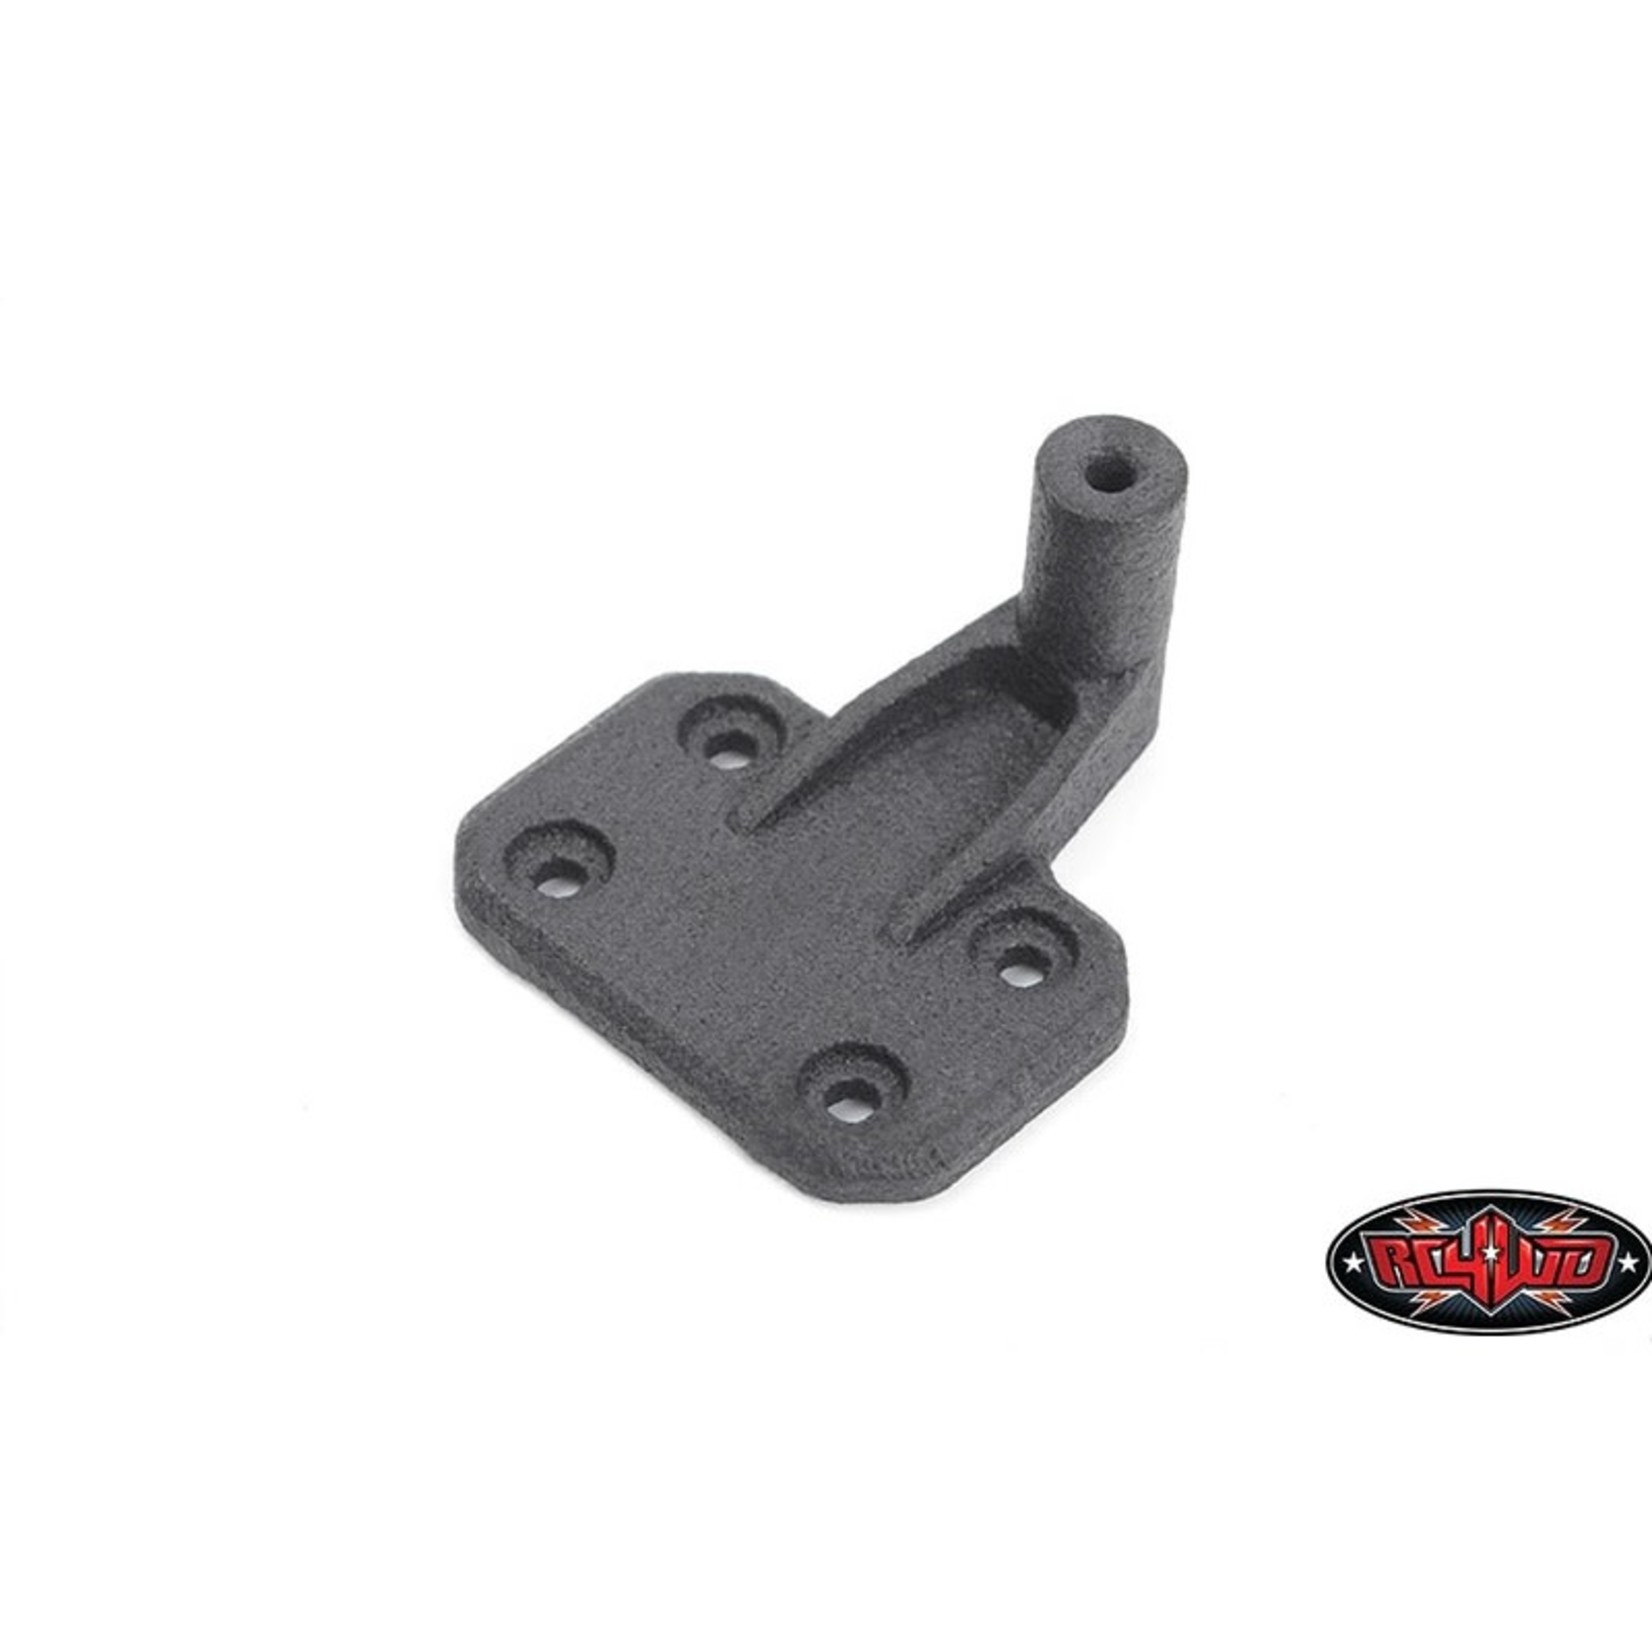 RC4WD RC4VVVC1045 RC4WD Jeep Wrangler Tire Holder SCX24